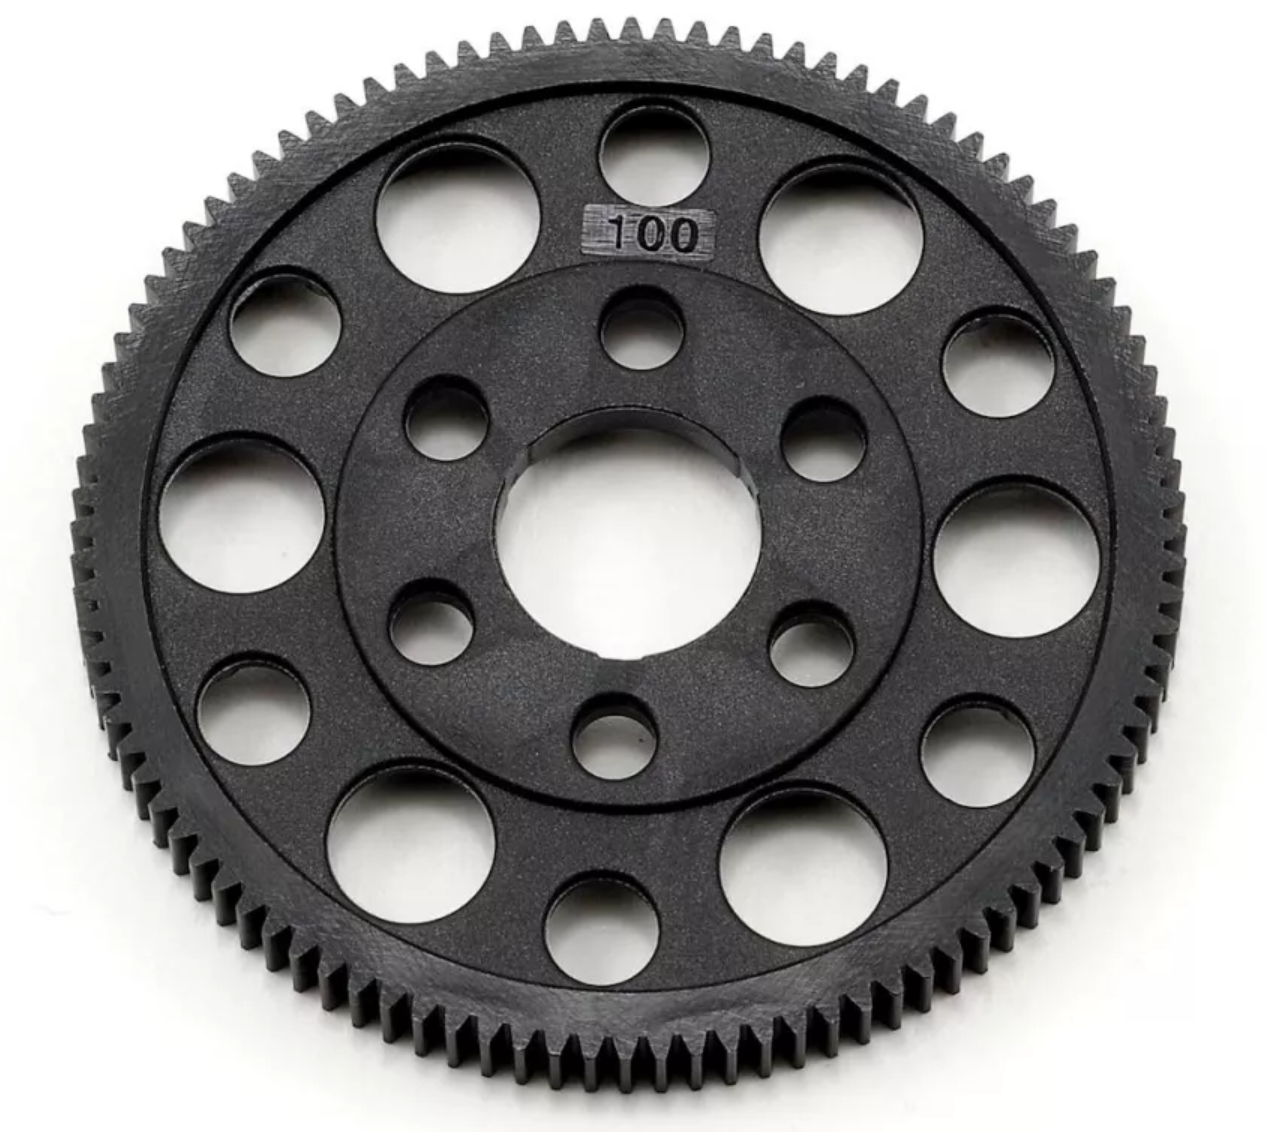 Xray Offset Spur Gear (Stock 13.5T) - 100T 64P